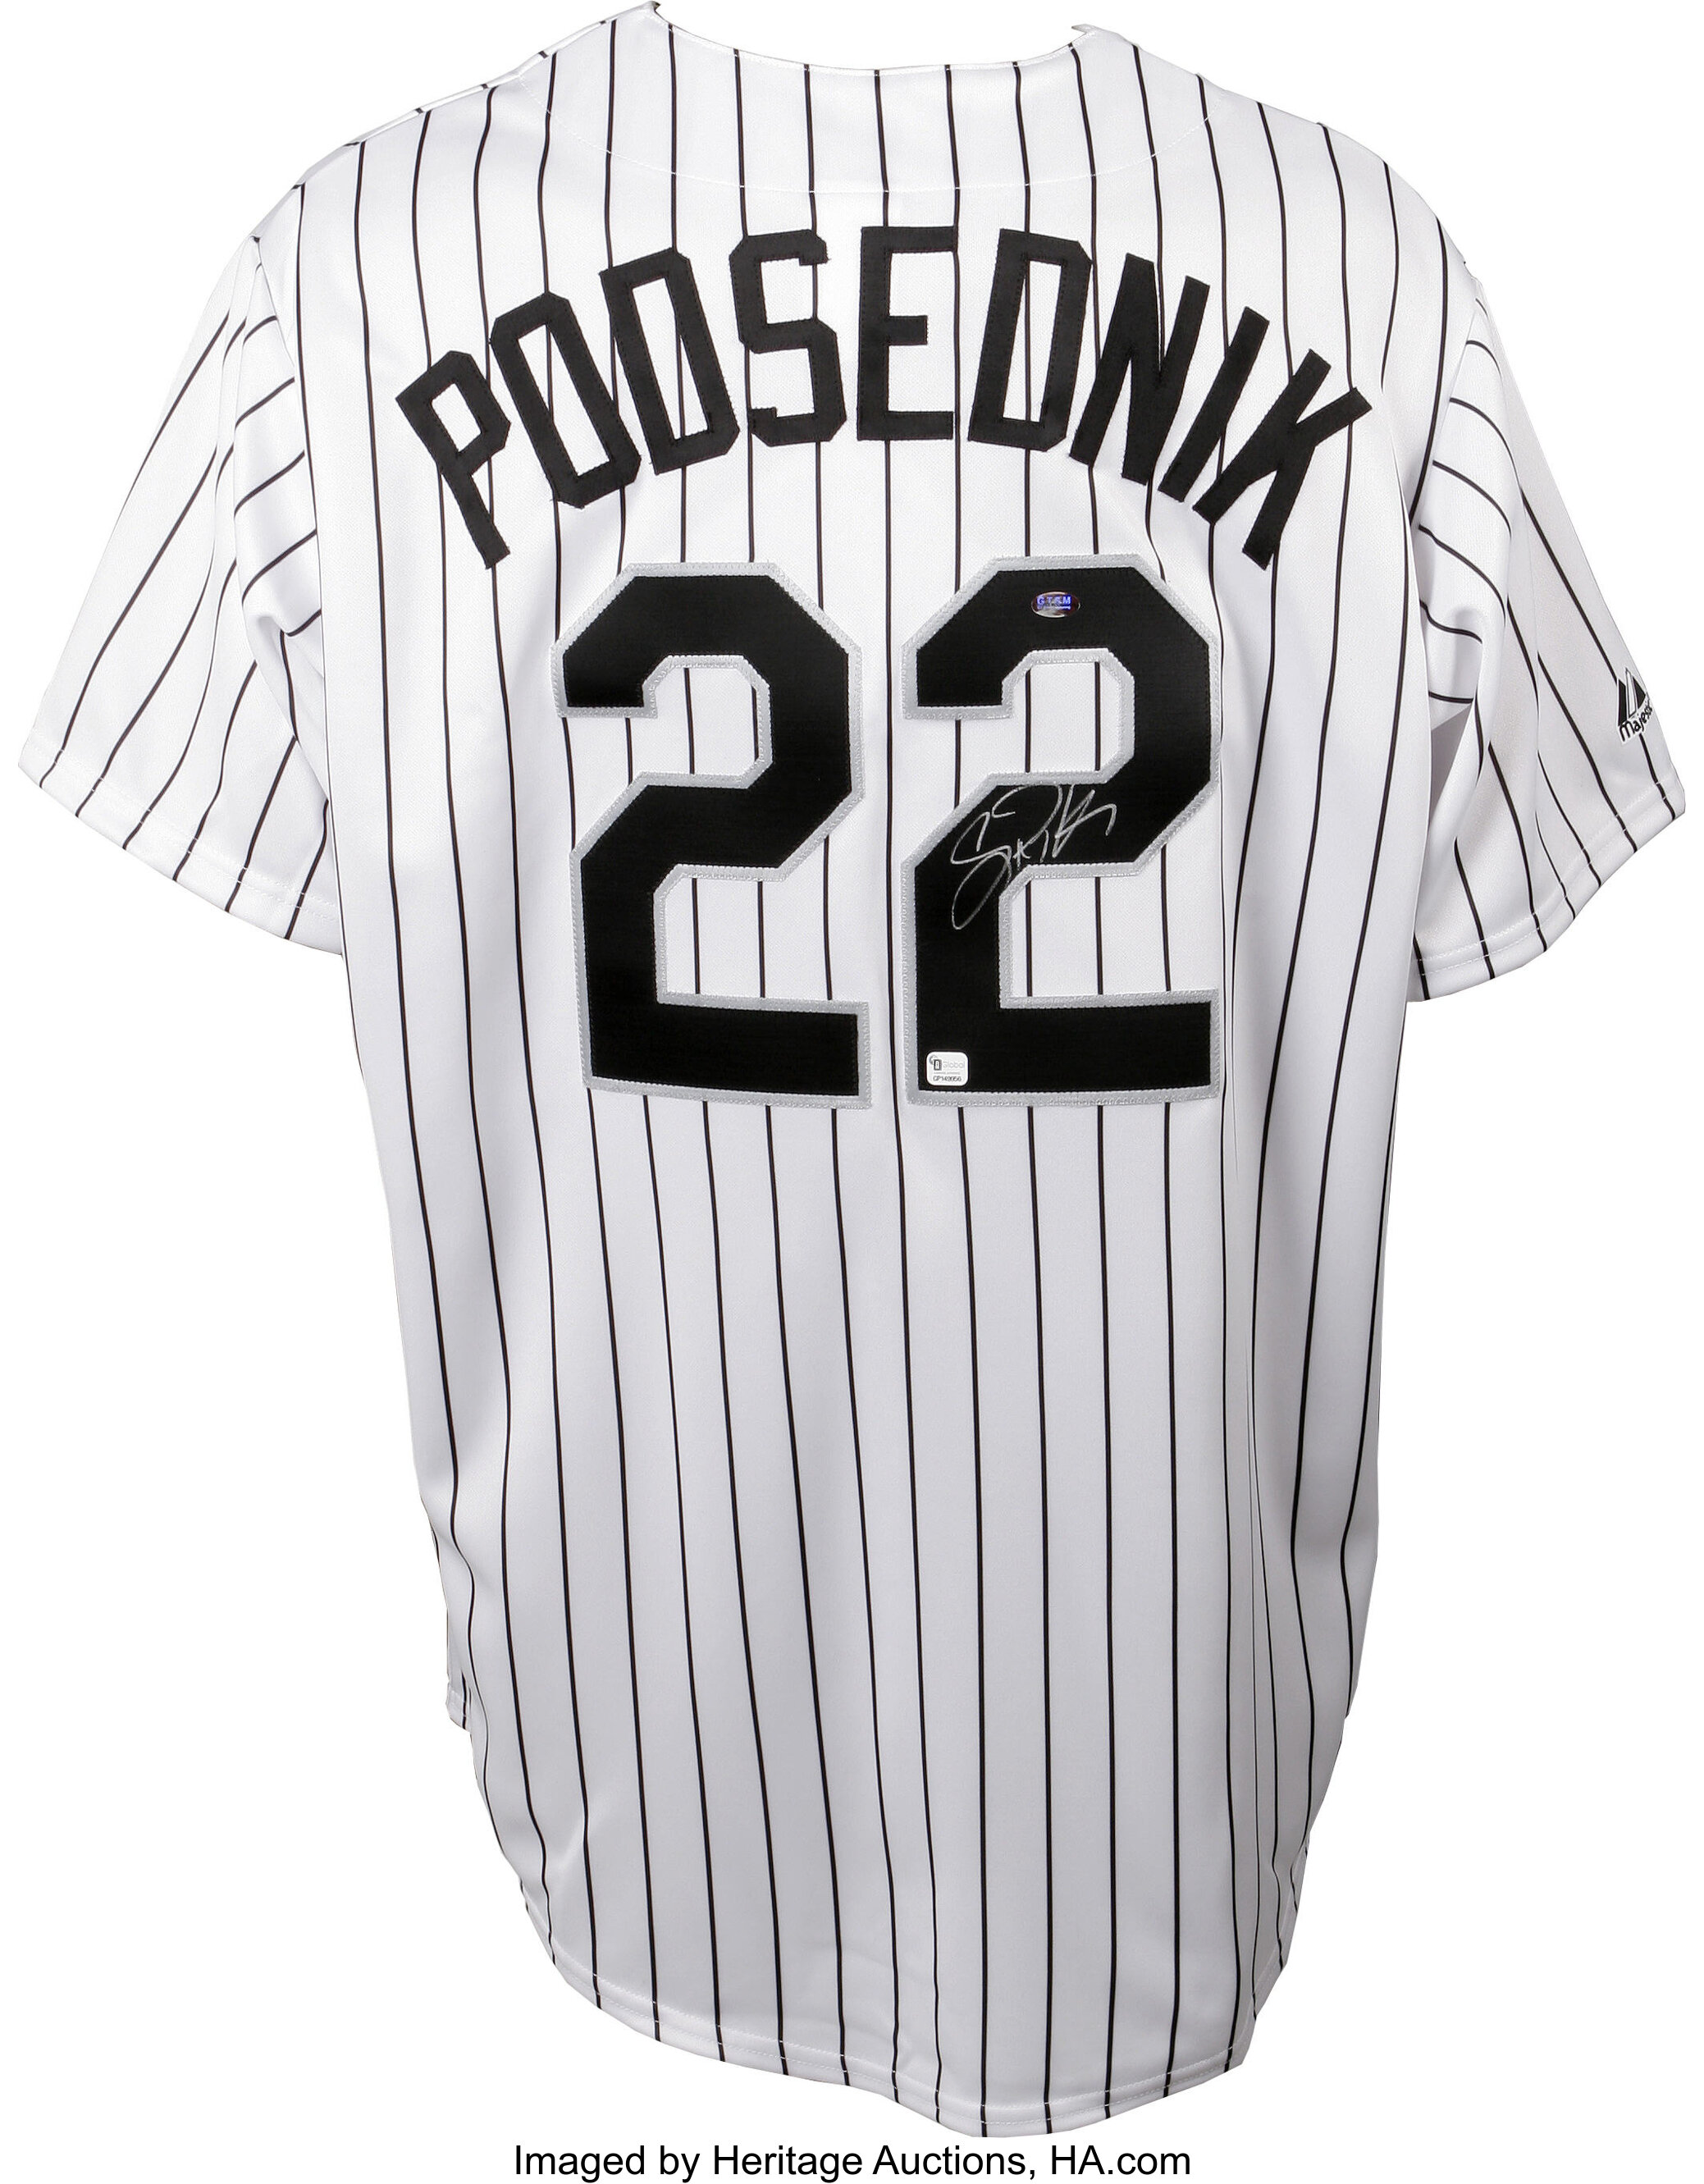 Scott Podsednik Signed Jersey. Another signed jersey from the World, Lot  #12311